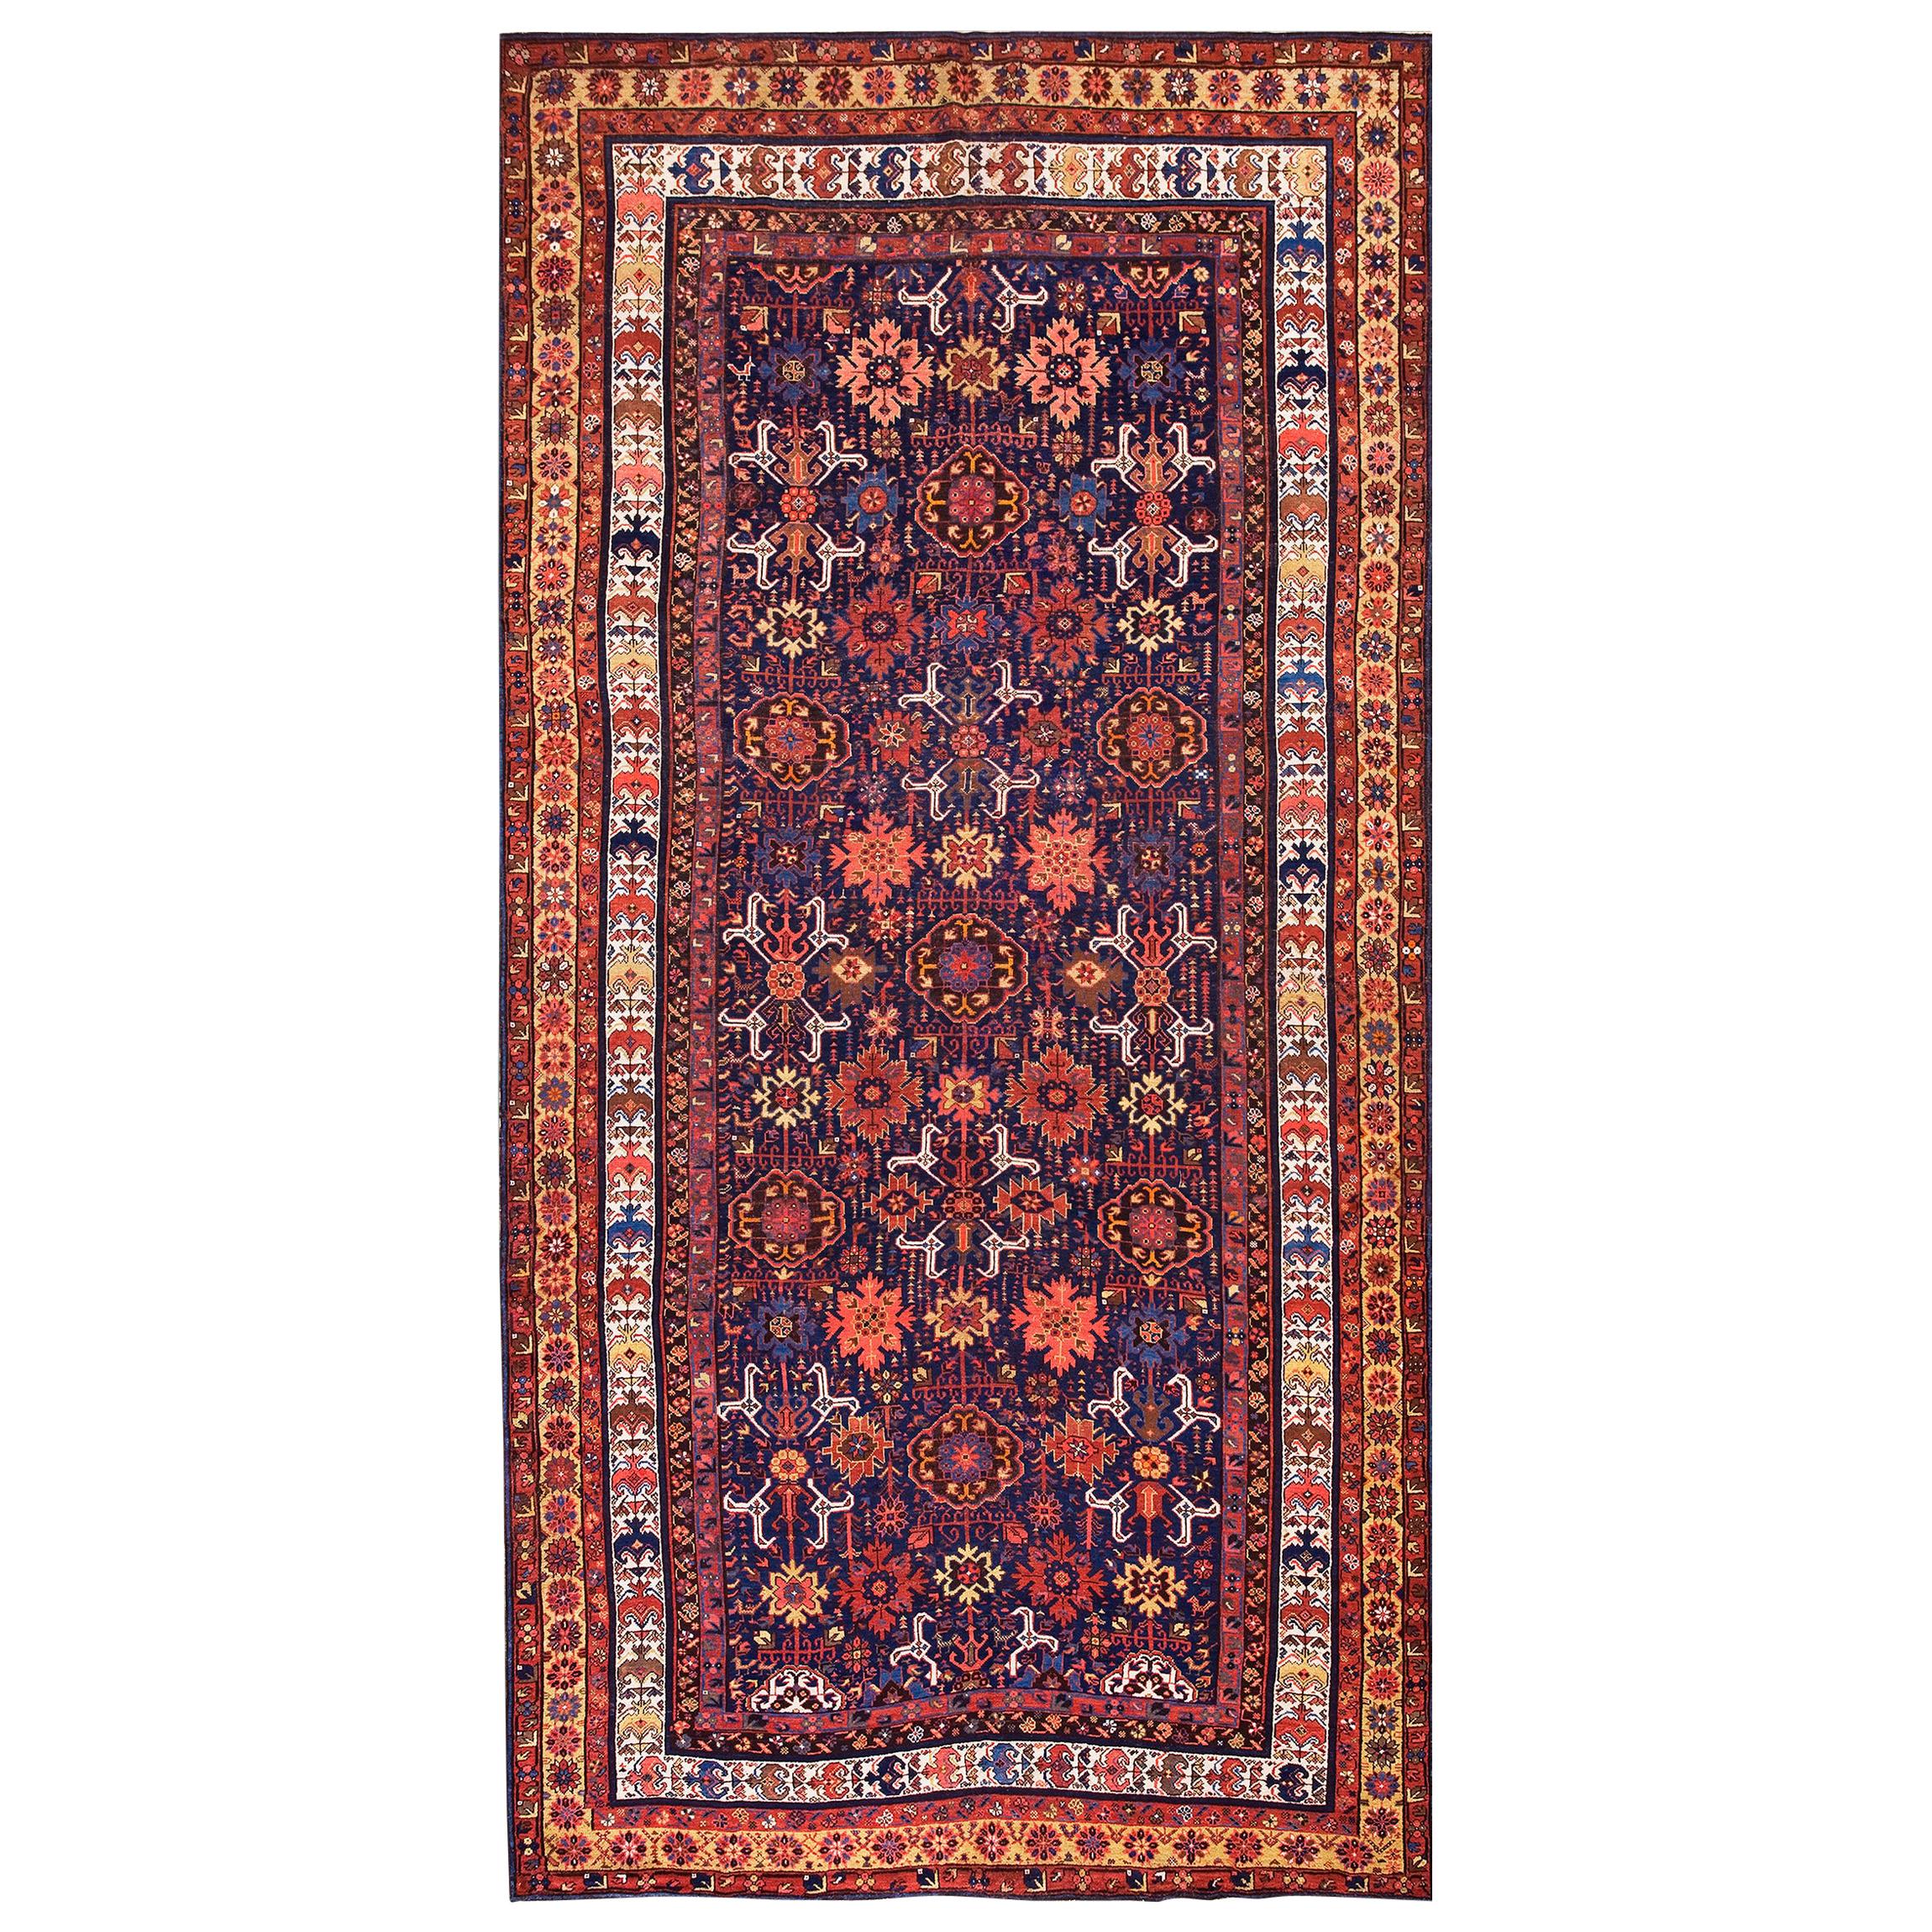 Late 19th Century N.W. Persian Carpet ( 7'2" x 14'2" - 218 x 432 ) For Sale